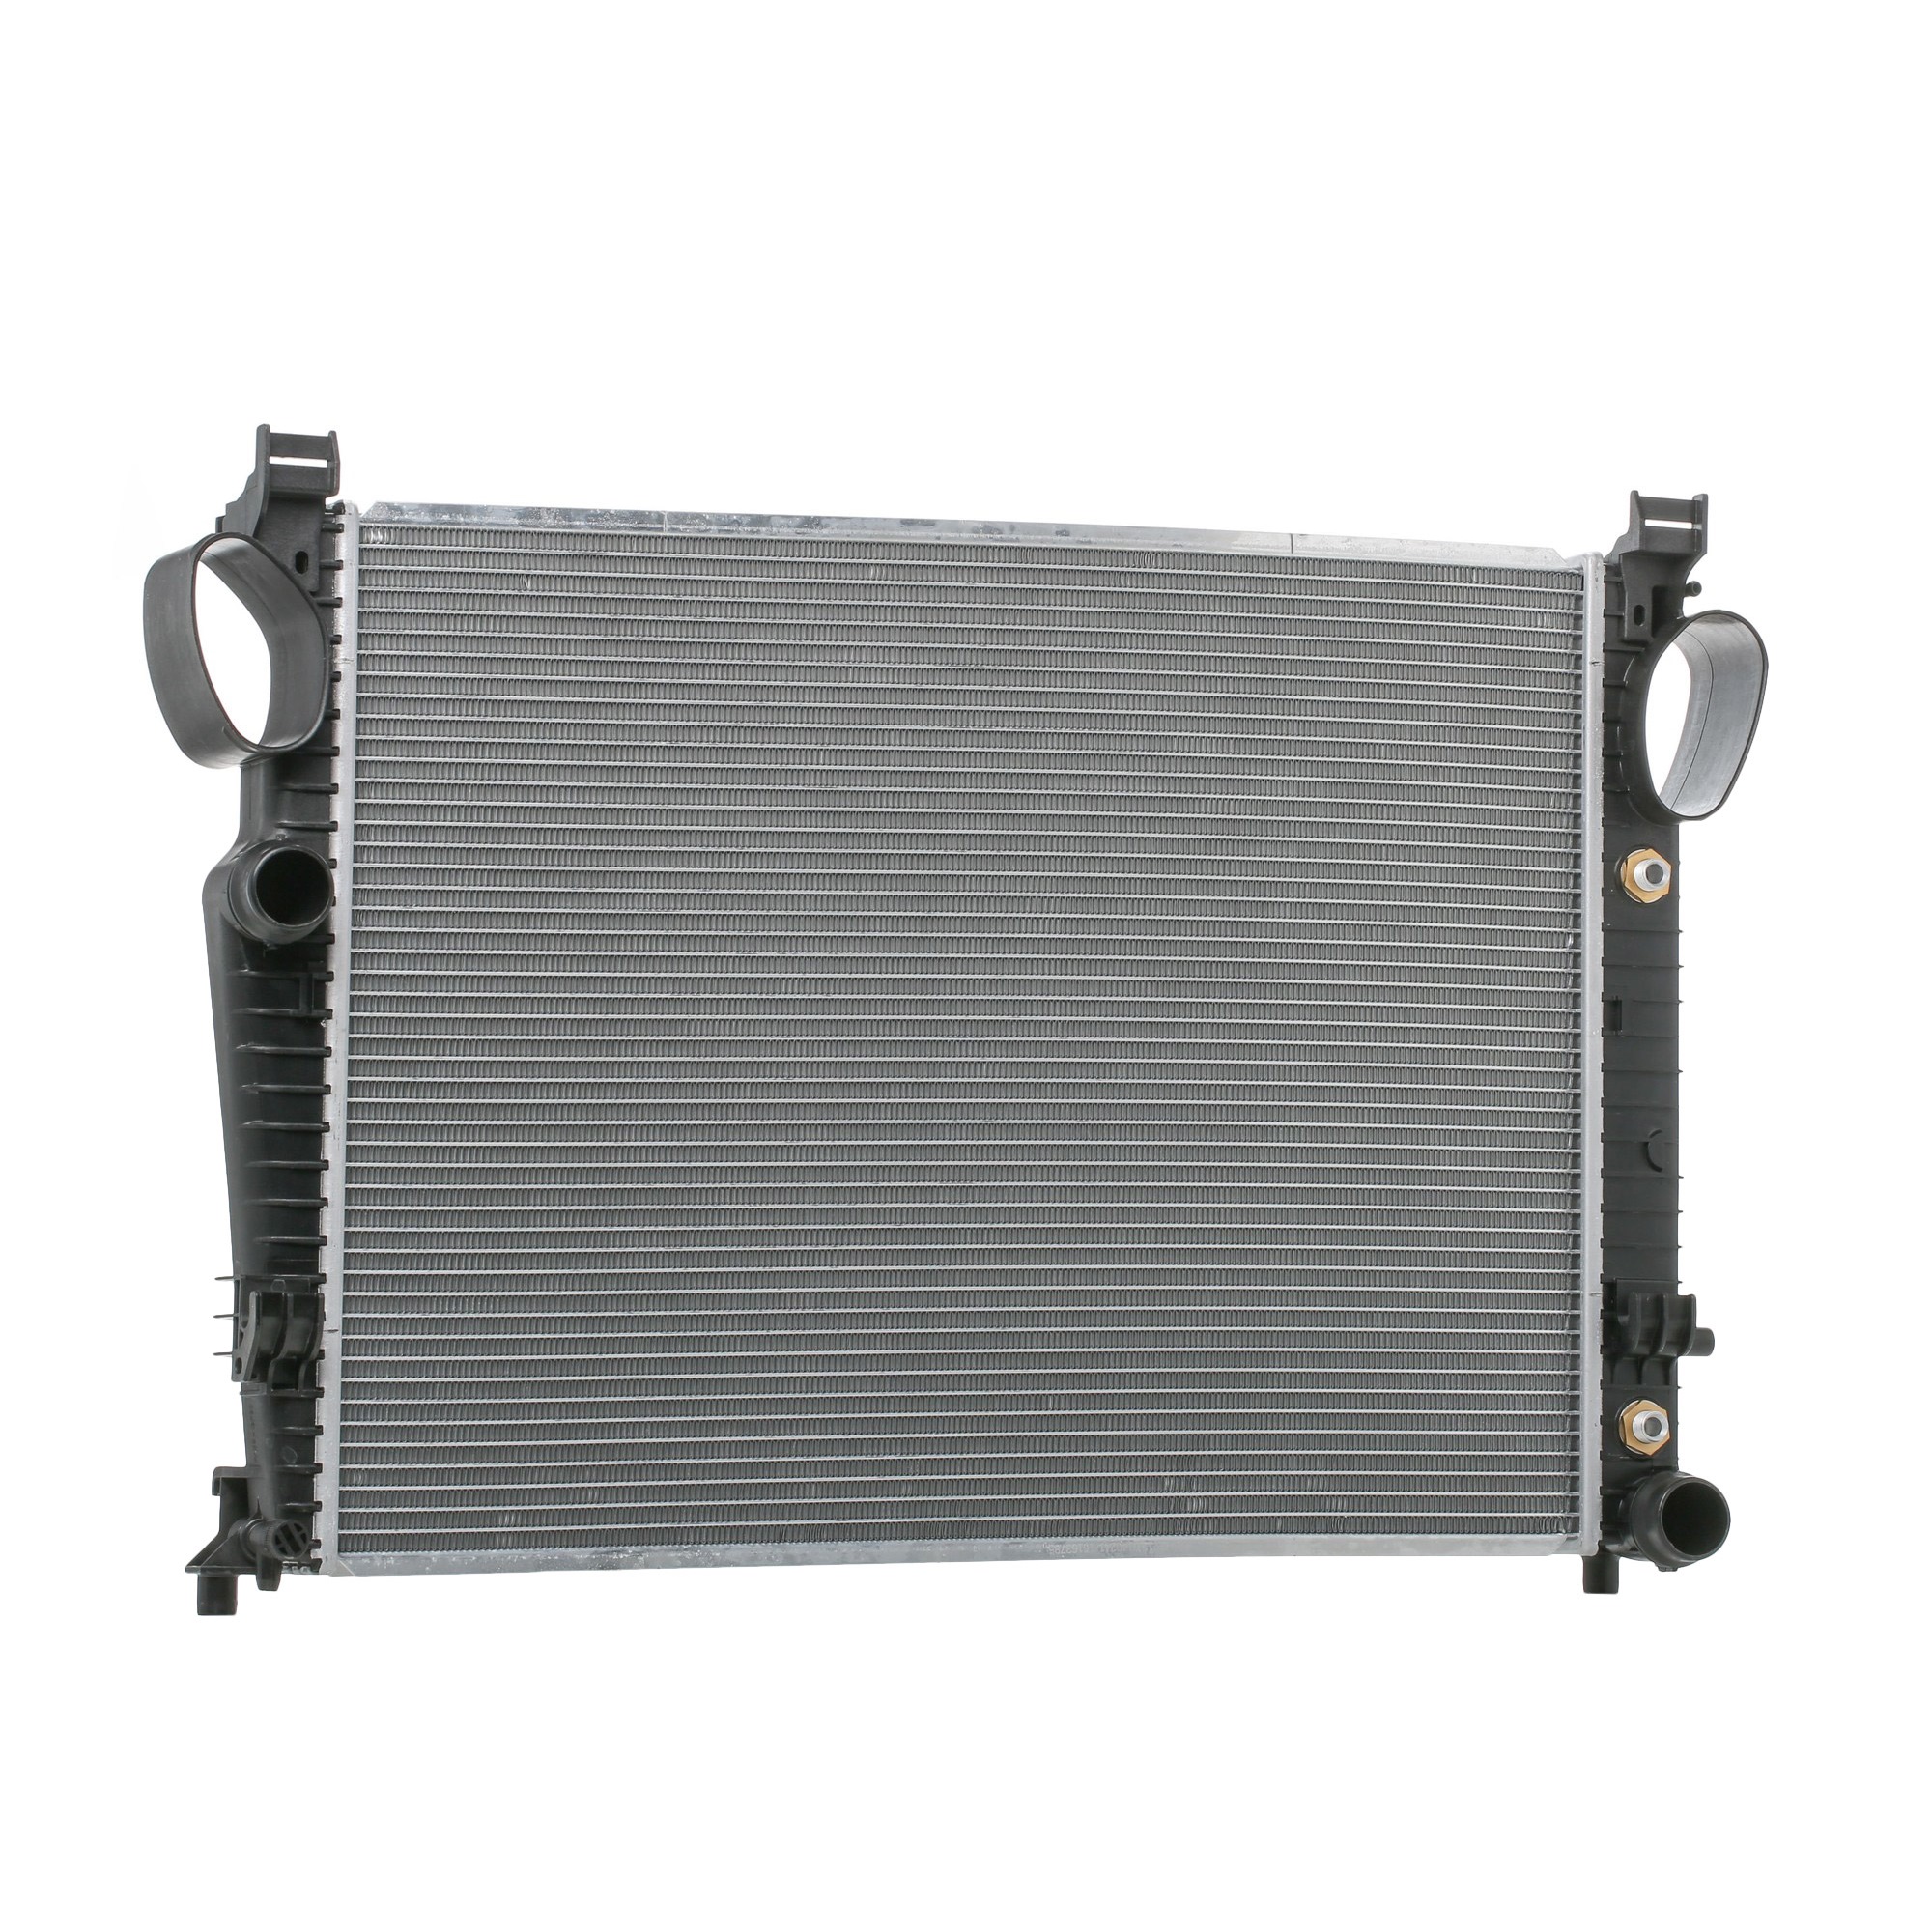 STARK SKRD-0121387 Engine radiator for vehicles with/without air conditioning, 641 x 473 x 42 mm, Manual Transmission, Automatic Transmission, Brazed cooling fins